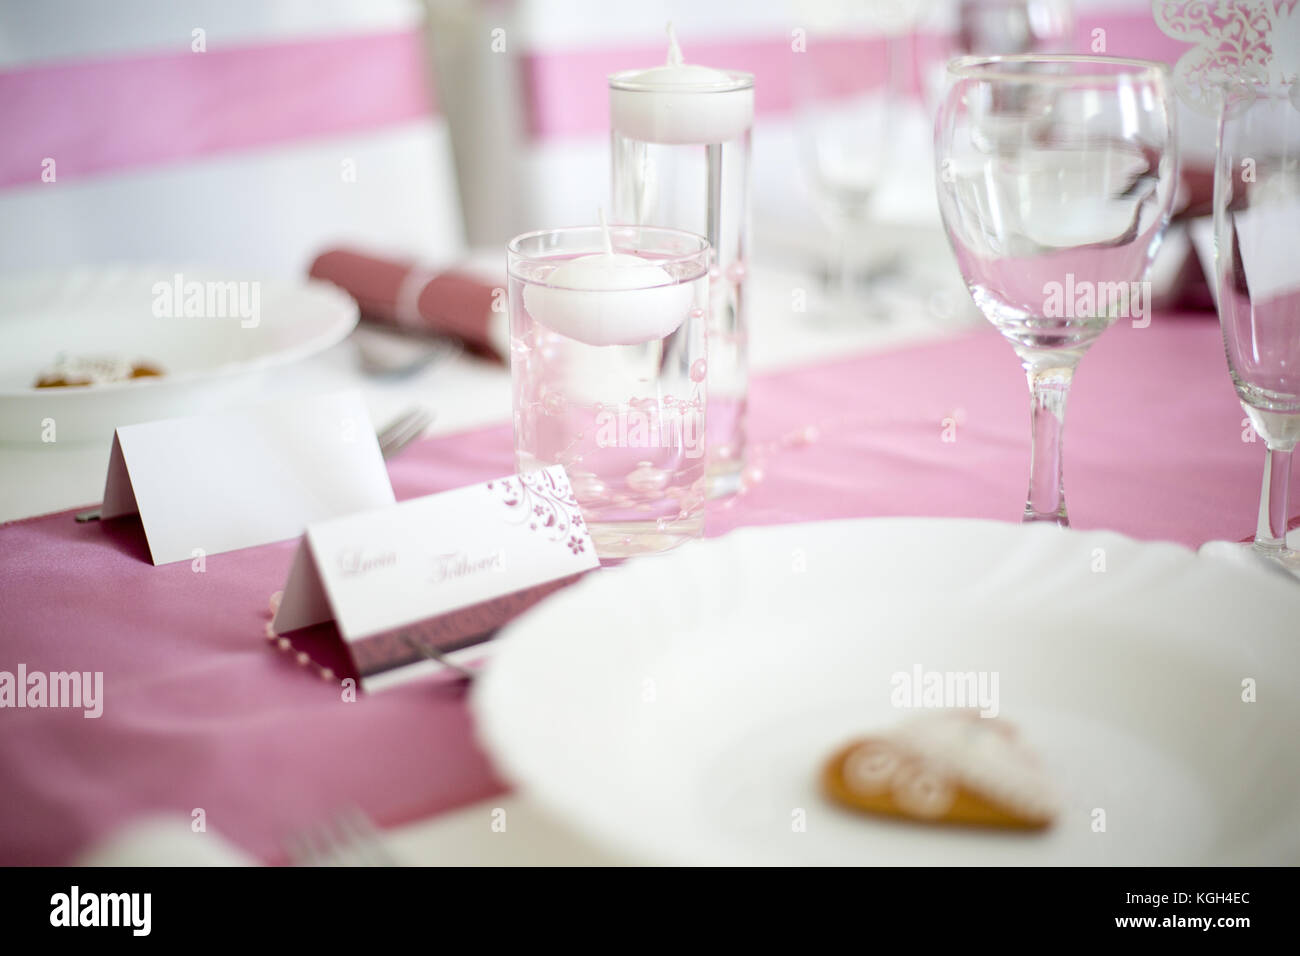 Pink and white wedding table with small round white tea candle in a clear glass, pink runner, empty wine glasses, white plate Stock Photo